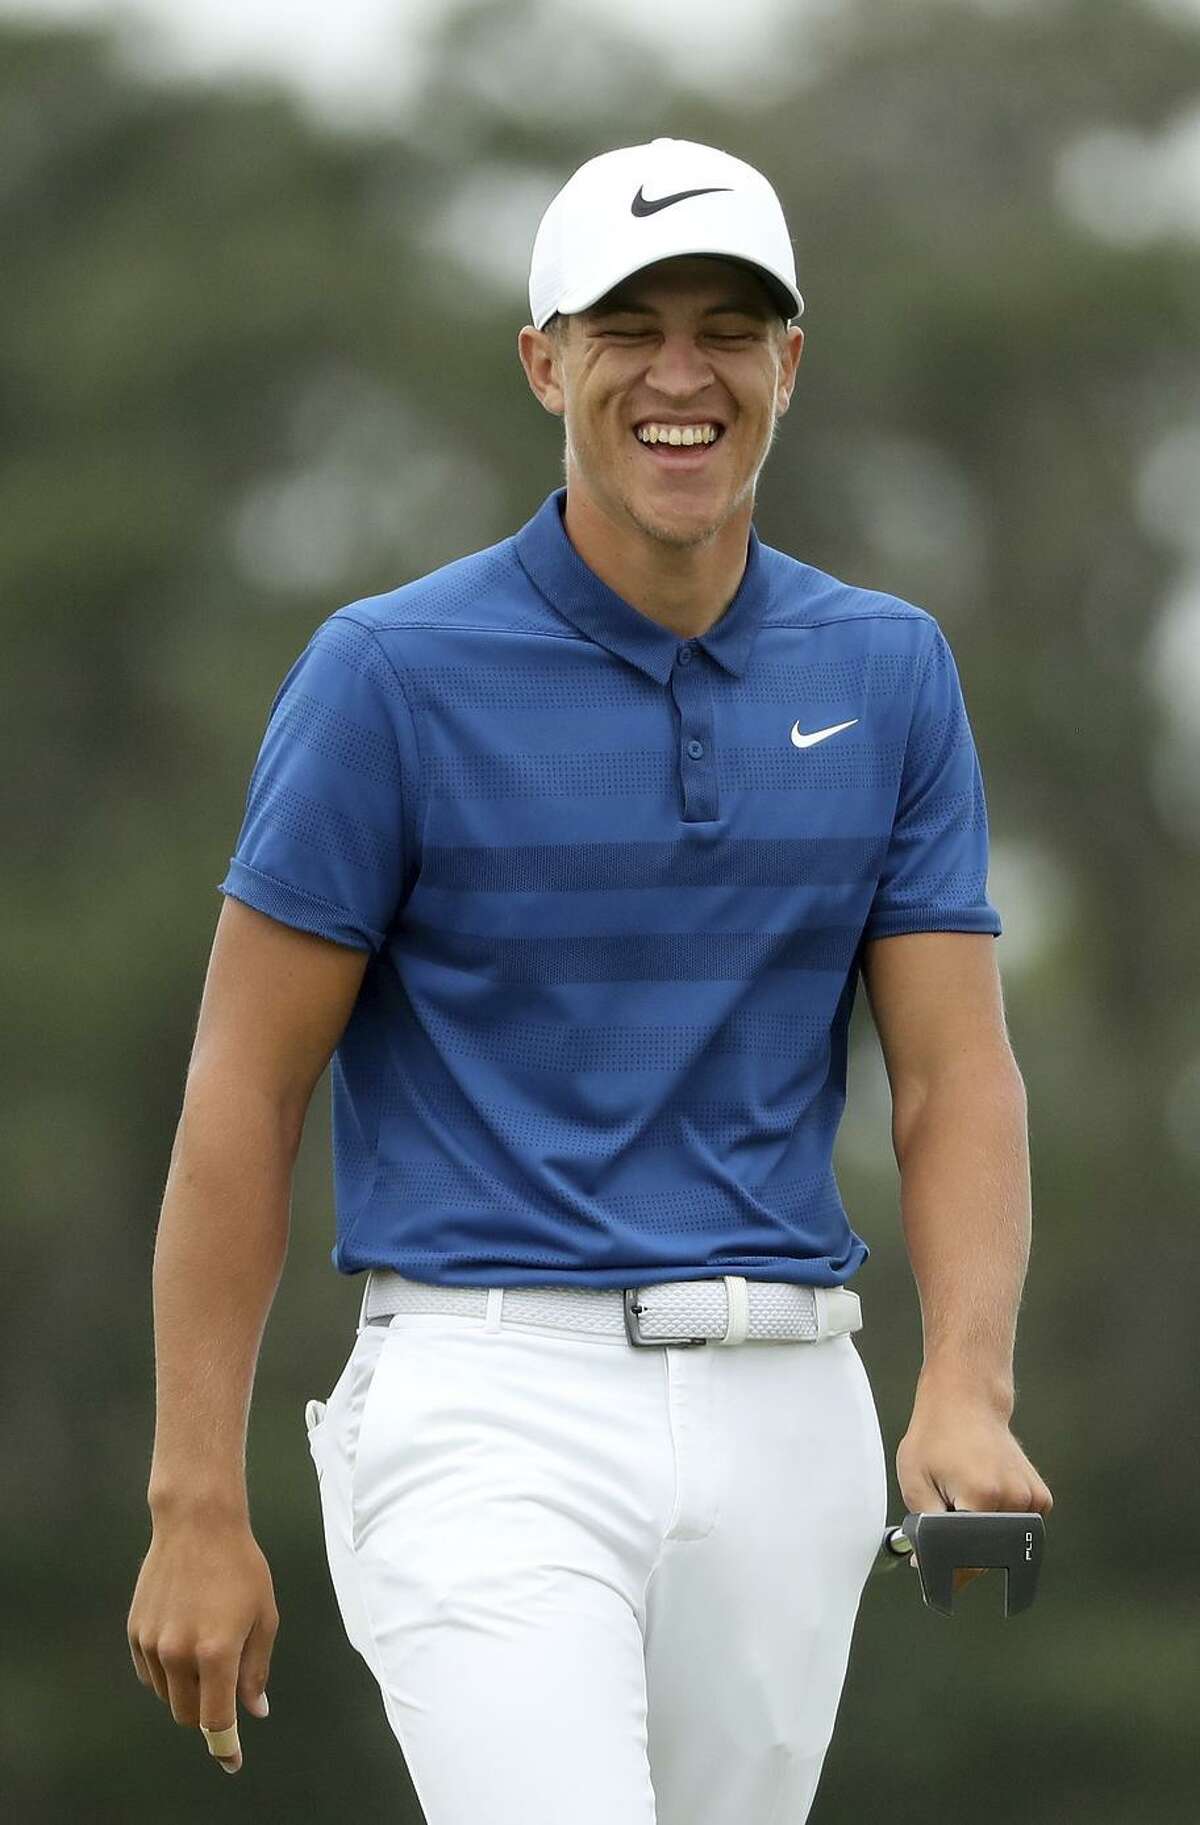 Cameron Champ, who in a year has gone from 1,057th on the PGA Tour to 95th, hits drives that routinely carry 340 yards.